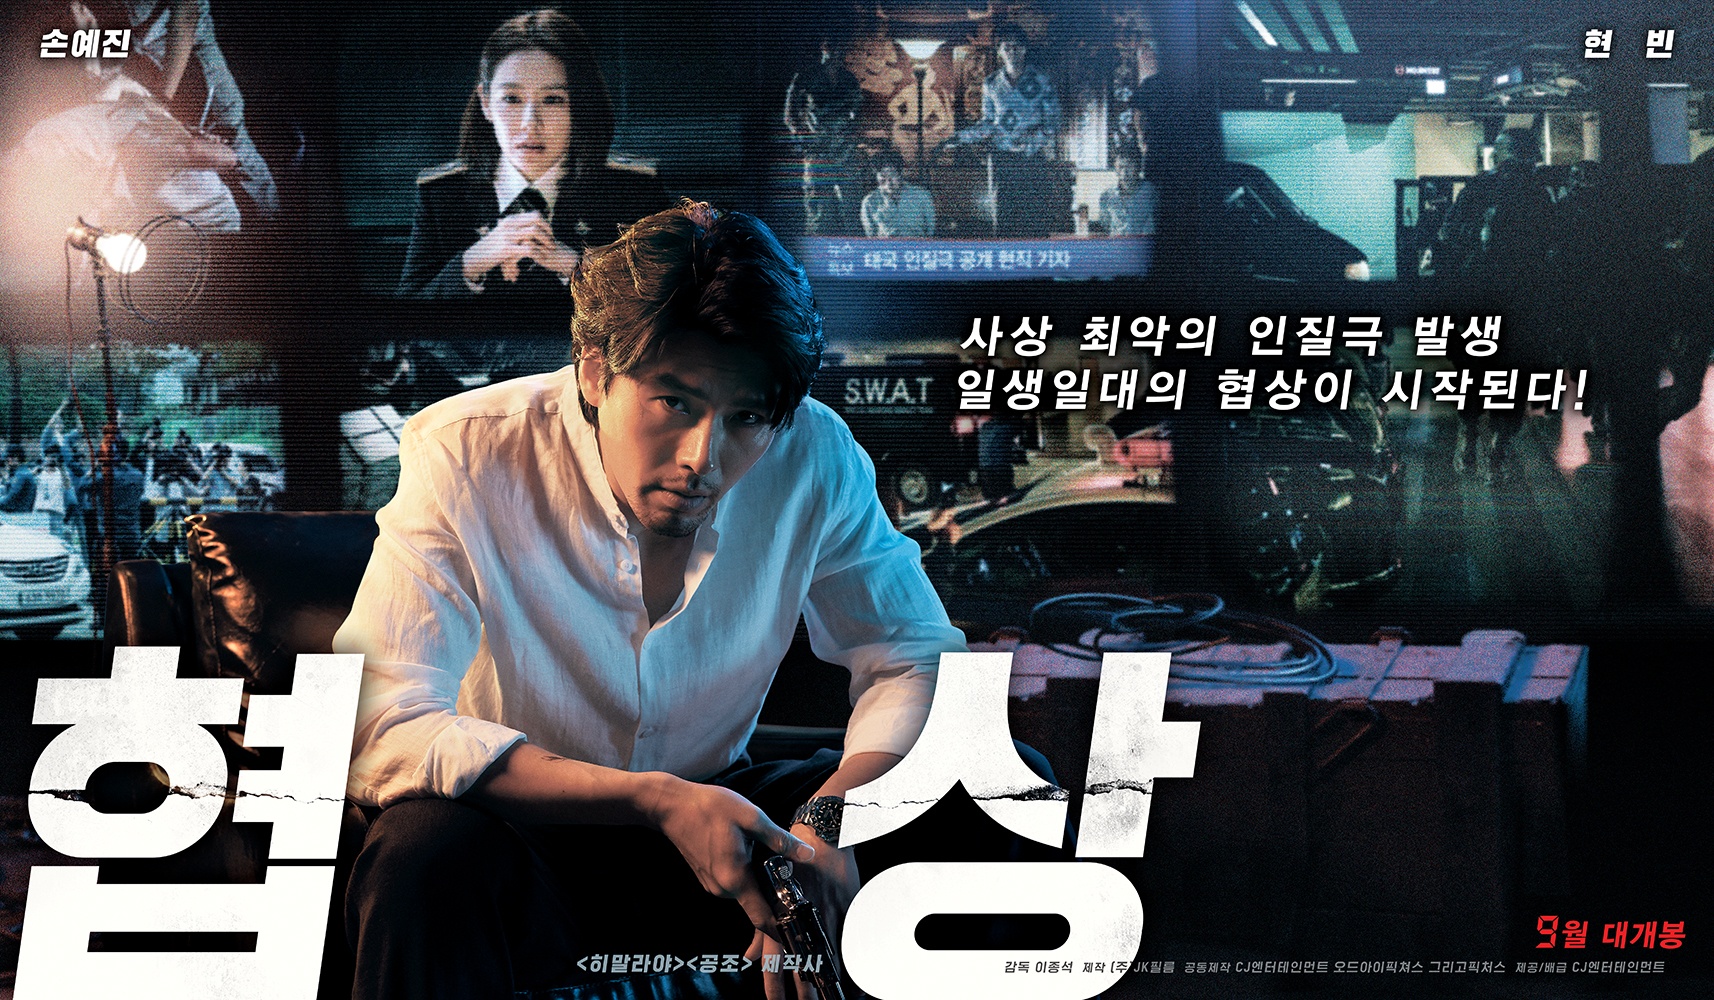 Director Lee Jong-suk, who directed assistant director in the film (2014) and adapted from , cast Actor Son Ye-jin and Hyun Bin, who were the first casts since writing scenario.Actor Son Ye-jin plays the role of Ha Chae-yoon, the Seoul Metropolitan Police Agencys Movie - The Negotiation Expert, Top Model for the first movie in Korea, and Hyun Bin was also the first to play the role of a weapon trafficker and hostage criminal Min Tae-gu.I think I have incarnation, director Lee Jong-suk said, laughing at the simultaneous casting of Son Ye-jin and Hyun Bin, and then put these two in my head when I write scenario.Just two people came up first - it was great to have Actor, who was also the best Actor and wondered what else would come out behind Actor.There were points that both were unexpected, curious and wanted to see. (Lee Jong-suk)Is a film aimed at the Korean Chuseok movie market this year.Some of the videos of the movie were released at the production report of the movie Movie - The Negotiation held in Apgujeong on the morning of the 9th.Son Ye-jin and Hyun Bin play this One shooting method, which shows each others faces in front of the monitor instead of facing each other in the movie Movie - The Negotiation.In fact, Son Ye-jin and Hyun Bin in the movie watch each other monitors from afar and play Movie - The Negotiation.Lee Jong-suk, director of the International Market, said, I wanted to shoot the scene of reunions of separated families like real life, so I first met Actors on the day I filmed it. Movie - The Negotiation also said.Son Ye-jin and Hyun Bin saw a small monitor and Top Model in a difficult task to play with their feelings.I didnt play face to face using this One shooting technique, but I played with Mr. Hyun Bin while watching the monitor; it was not easy.But it was nice to think that it fits well with only the monitor, and there is something like a sense of comradeship that does not have to say because it is the same age as Mr. Hyun Bin and his debut time is similar. (Son Ye-jin)Both Son Ye-jin and Hyun Bin said they were interested in reading scenario and participated in Movie - The Negotation.I first read scenario and read it at once, and I was curious about the back of it all the time, Son Ye-jin said, praising the tension and immersion were overwhelming scenarios.Hyun Bin also said, Movie - The Negotation, and the hostage, Movie - The Negotation, are interesting and have been involved.The story that Mr. Hyun Bin is seeing this scenario positively was one of the decisive factors, Son Ye-jin said. I thought it was cool to boldly top model in this role because it is so different from the existing image of Hyun Bin.At this point of Son Ye-jin, Hyun Bin said, There were many difficult and unfamiliar parts of the one live broadcast, and Son Ye-jin thought it was an actor that could solve all of it.It is an actor who can deliver a lot of things with his eyes even if he smokes while watching the monitor. I usually have to look at Actor while listening to his breathing and watching his movements, but I can not do this, and I have to listen to the voice of the other person through the in-ear, so it was unfamiliar.Son Ye-jin, who is attracting attention as an actor who tries new works every time, plays the role of Movie - The Negotation and plays the first top model in the police role.Son Ye-jin said, Once the audience is tired of what I have seen in the movie I have seen before or if the character is similar. I am tired of repeating such a character.But not only me but other Actors also find differentiated characters and genres.Fortunately, I have the opportunity to Choice the next work into another genre and I have the desire to show a new look as constantly as possible. Son Ye-jin cut his head in a single hair and played a role in the work to show the Movie - The Negotiation appearance.Hyun Bin also agreed with Son Ye-jin, saying, I am also doing my work without resting, and I have the opportunity to Choice the genres, works, and characters I want to do, and I thought I wanted to communicate with the audience and viewers.You say a lot of first villain, and I did not distinguish between villain and traitor, said Hyun Bin.I talked to the director a lot about how this character could look more attractive because it is important to make even bad people persuade, he said. I thought what was the way to get away from the typicality and deliver it to a little different Feelings.Lee Jong-suk said, There will be a tension that can not see the clock during the running time, Lee said of the attraction point of <Movie - The Negotiation>.There was a lot of thirst for new material.There are a lot of movies, but there are similar Feelings, so I wanted to try something new. I was worried for a long time.Ive tried a lot to get the tension out of limited space and limited time, watch.The first Korean film to apply this One shooting technique